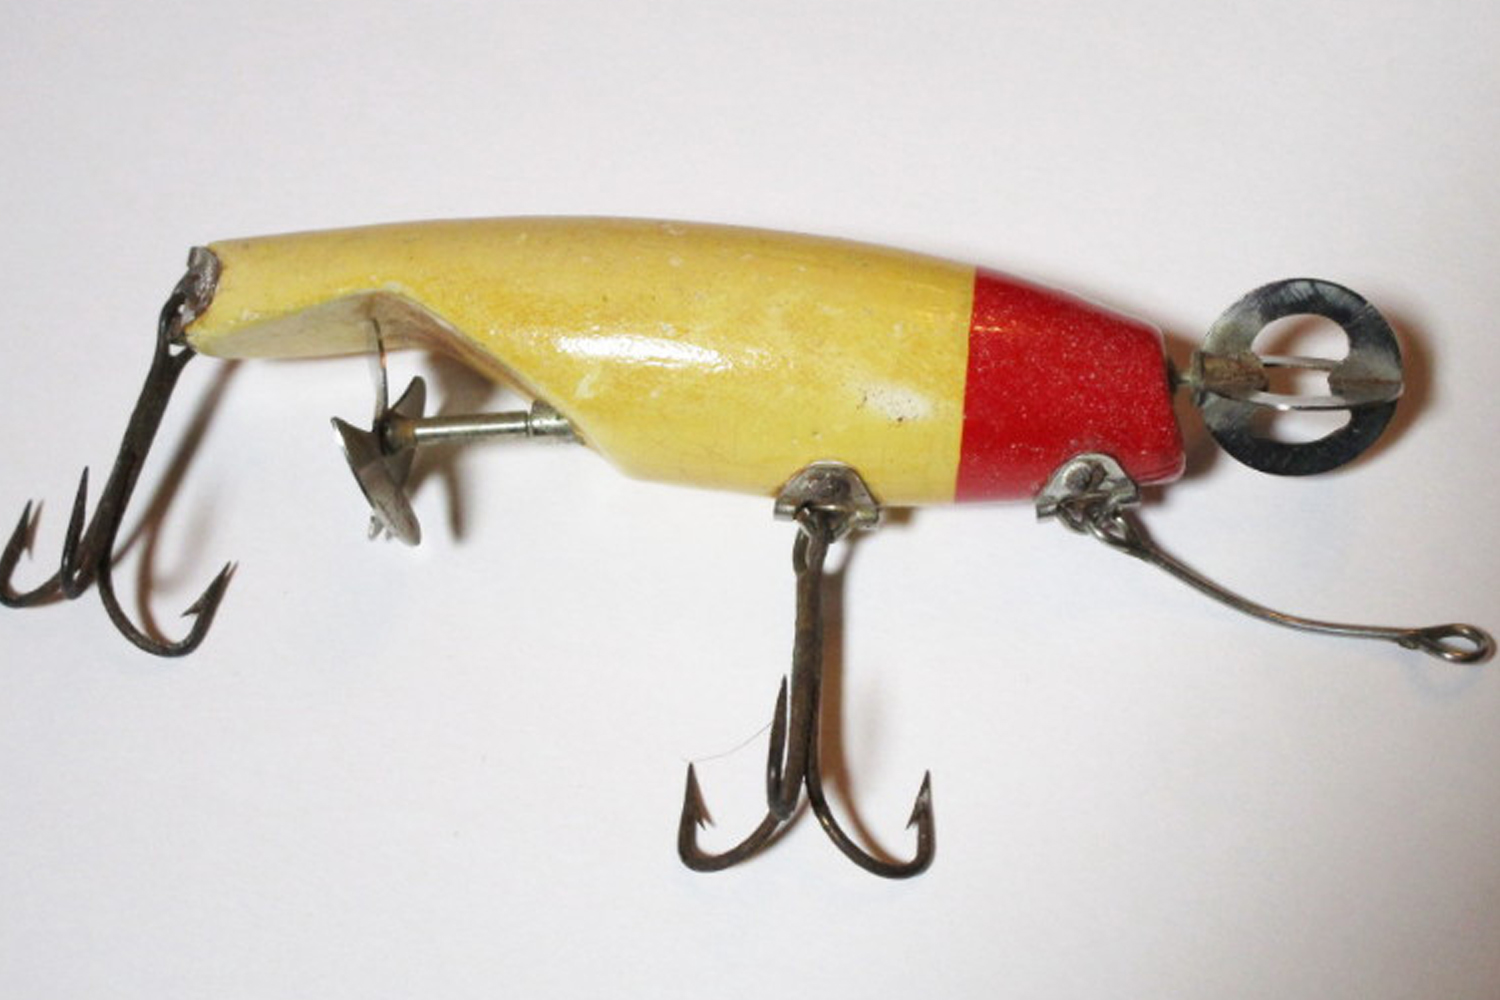 Different Types Of Fishing Lures To Consider - Yellow Bird Fishing